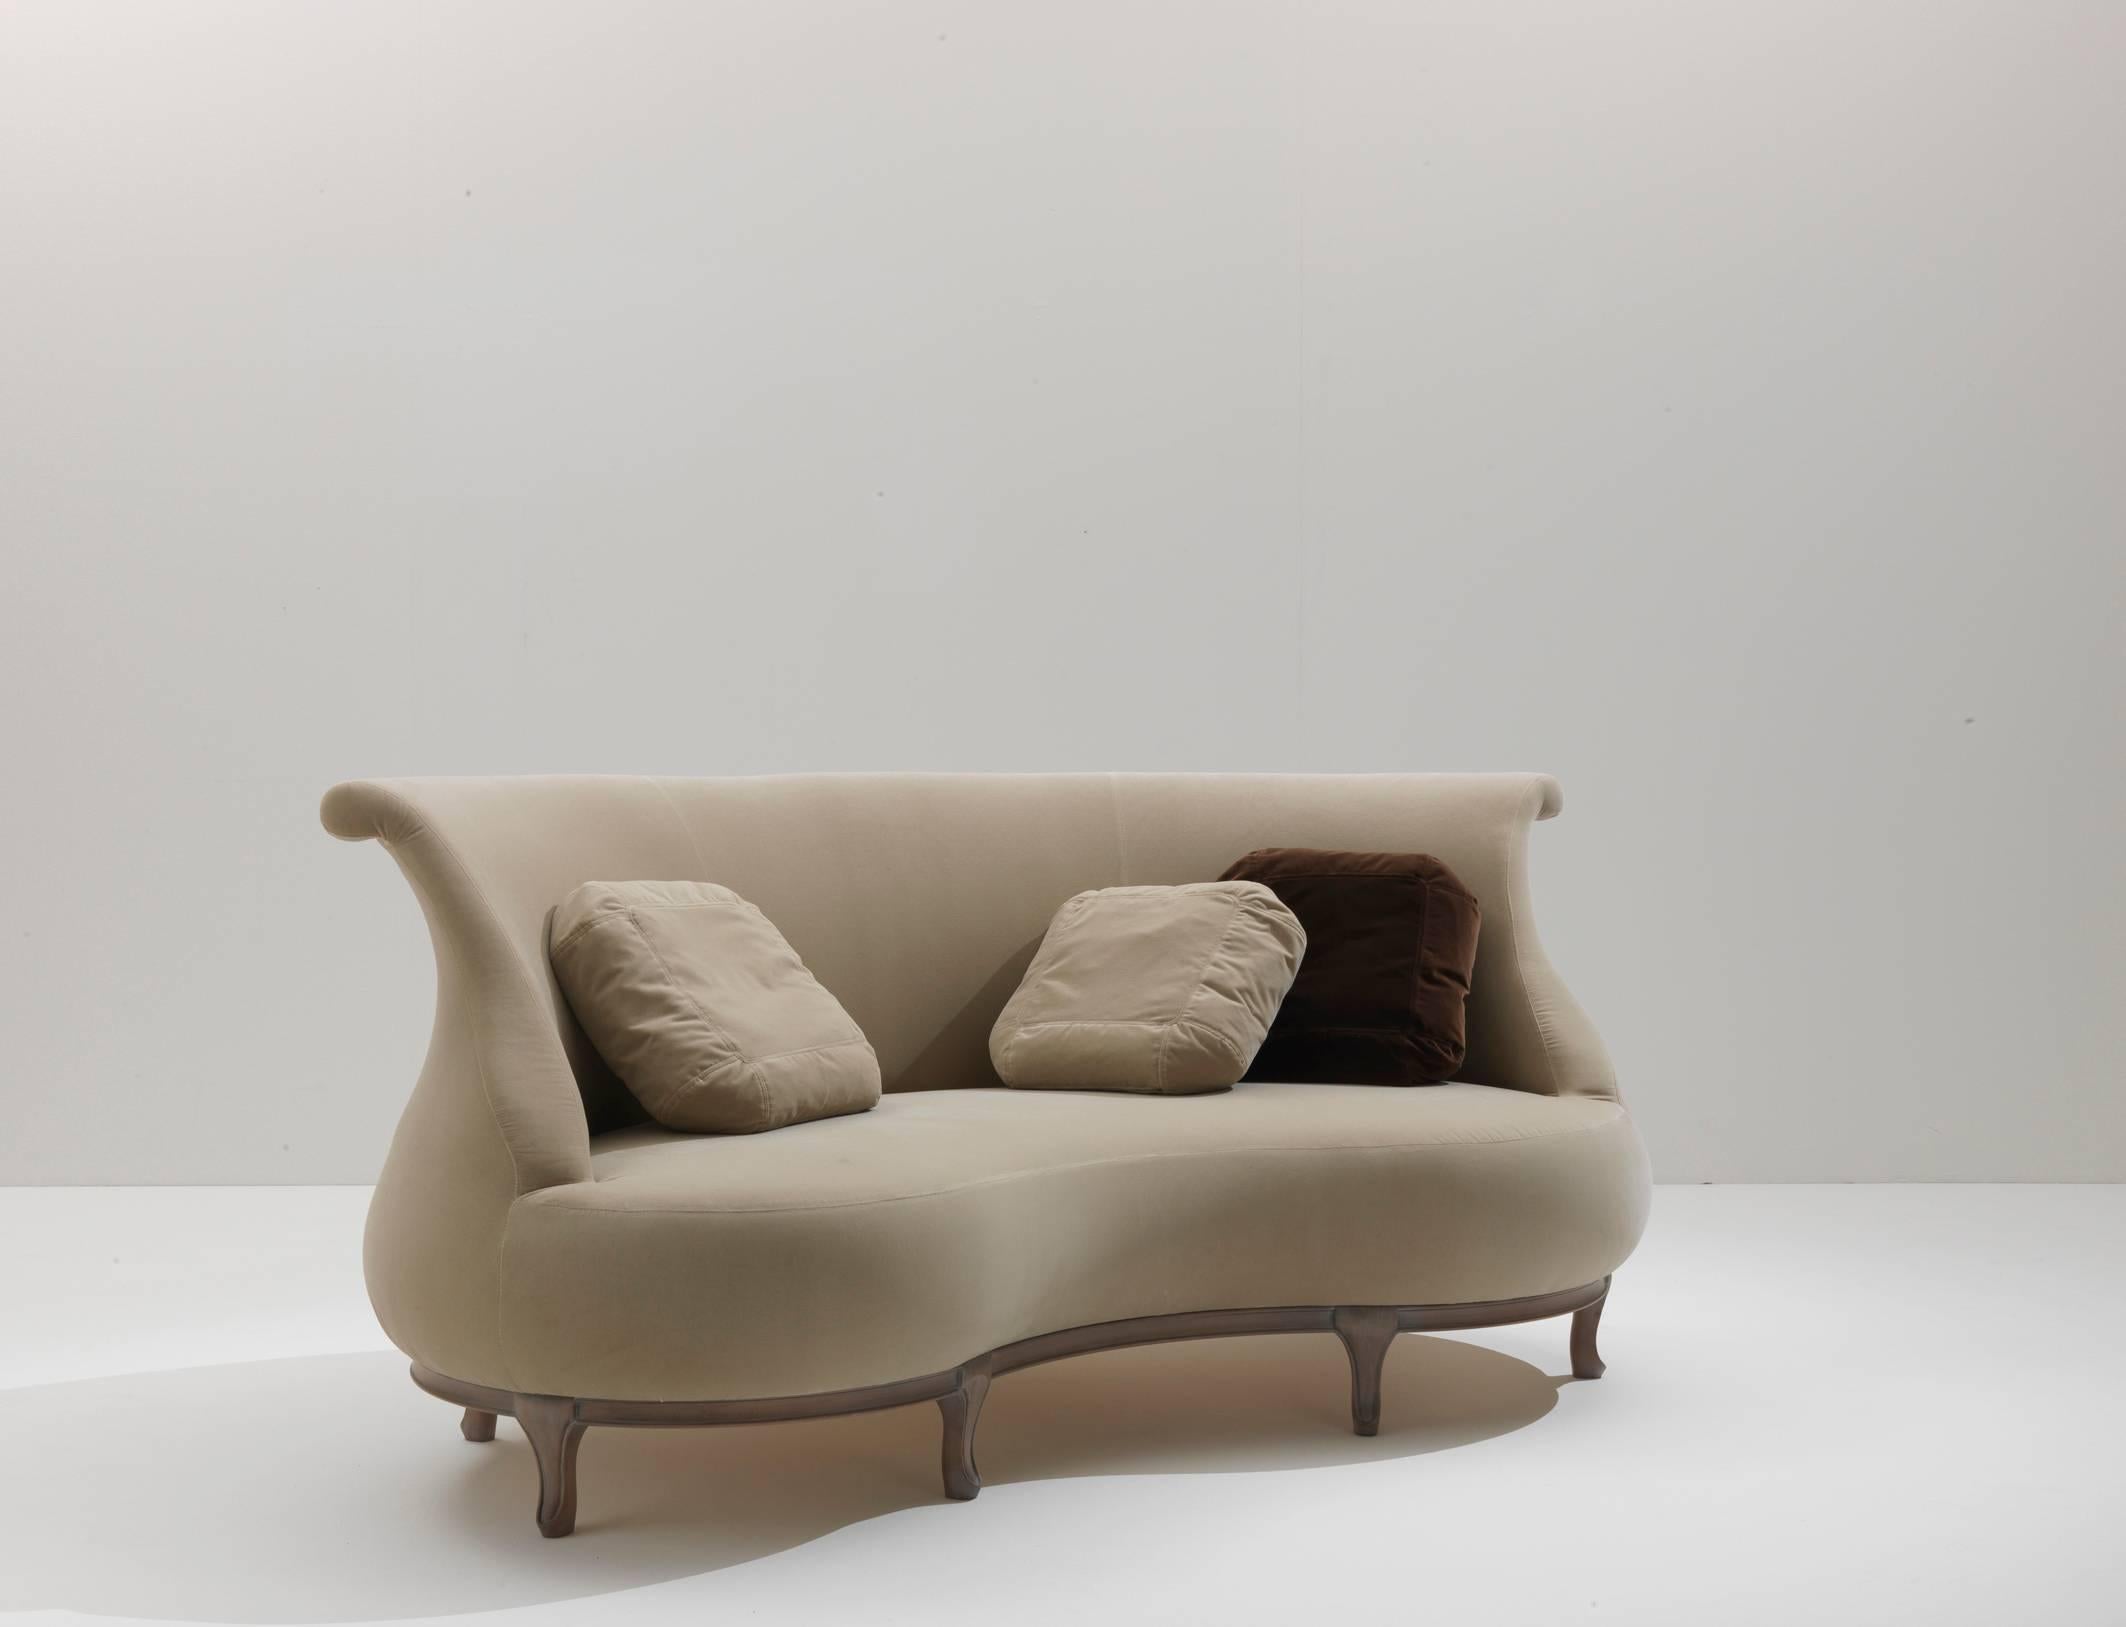 Like the Plump chair and pouffe, this sofa makes use of simple sweeping lines atop a wooden base. Its bean-shape ensures perfect relaxation and good conversation too. Sitters can face towards each other or simply sink back into the sofa’s ample